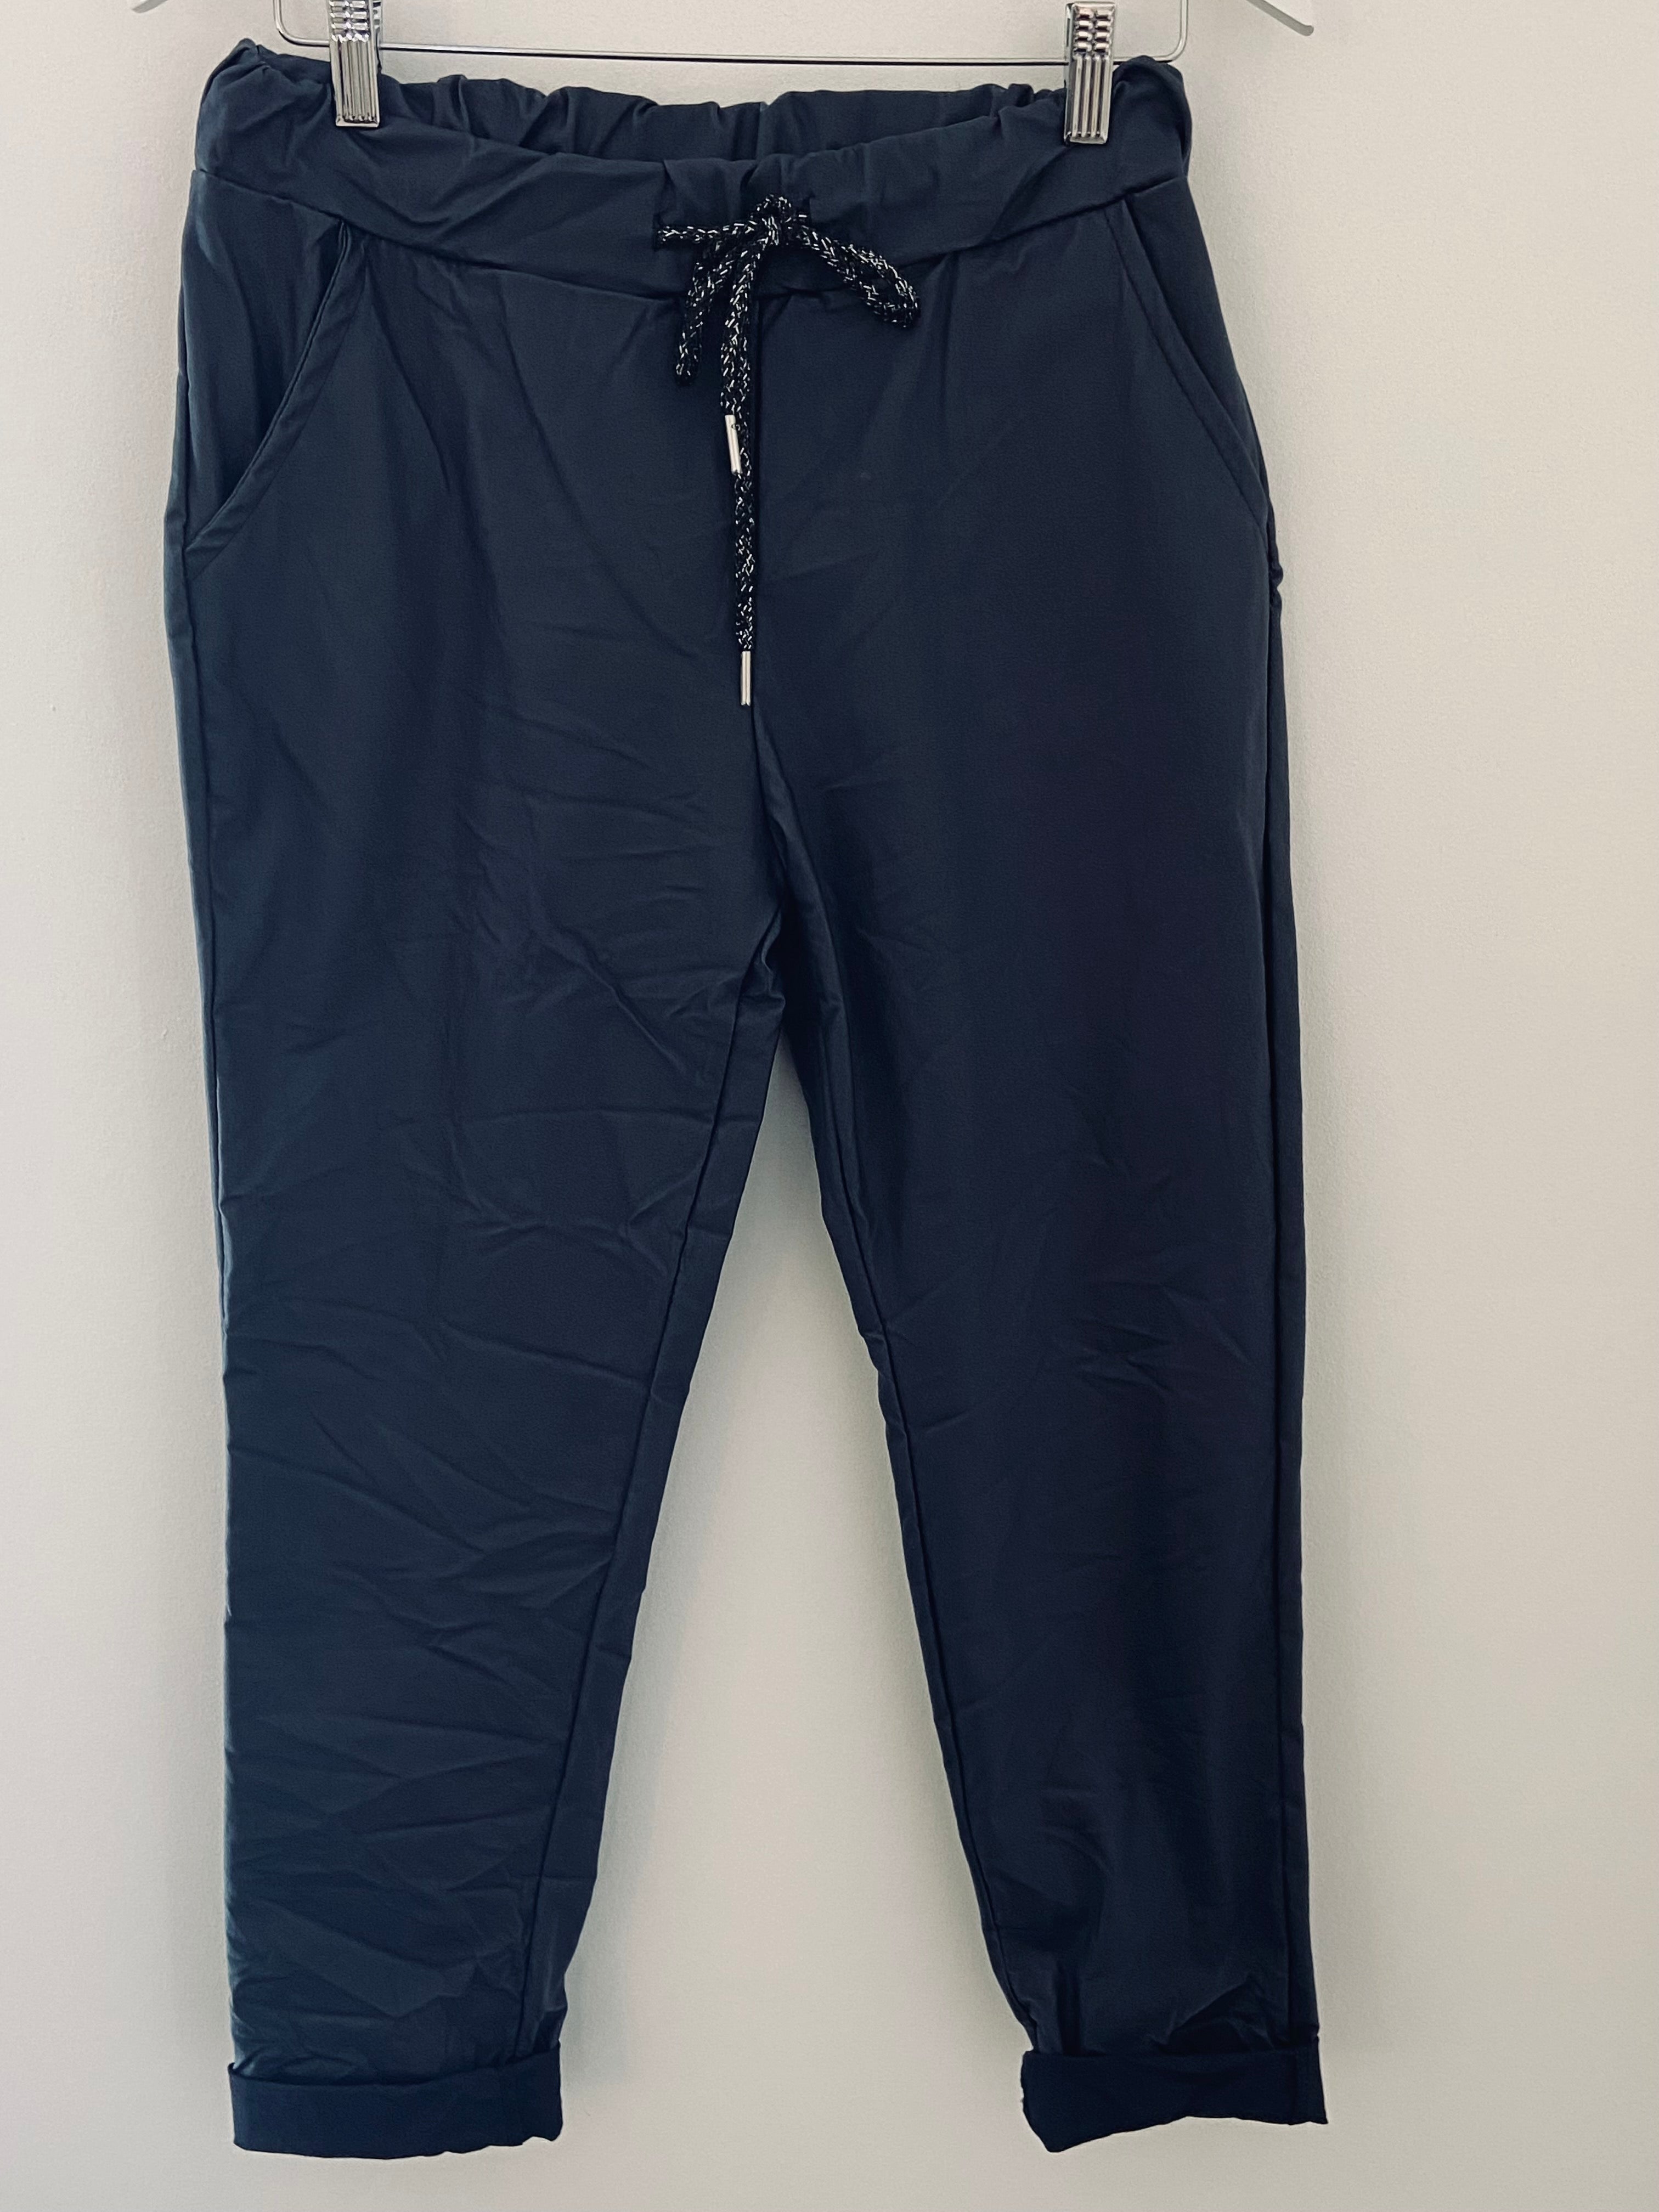 Super Stretch Joggers in Waxed Ink